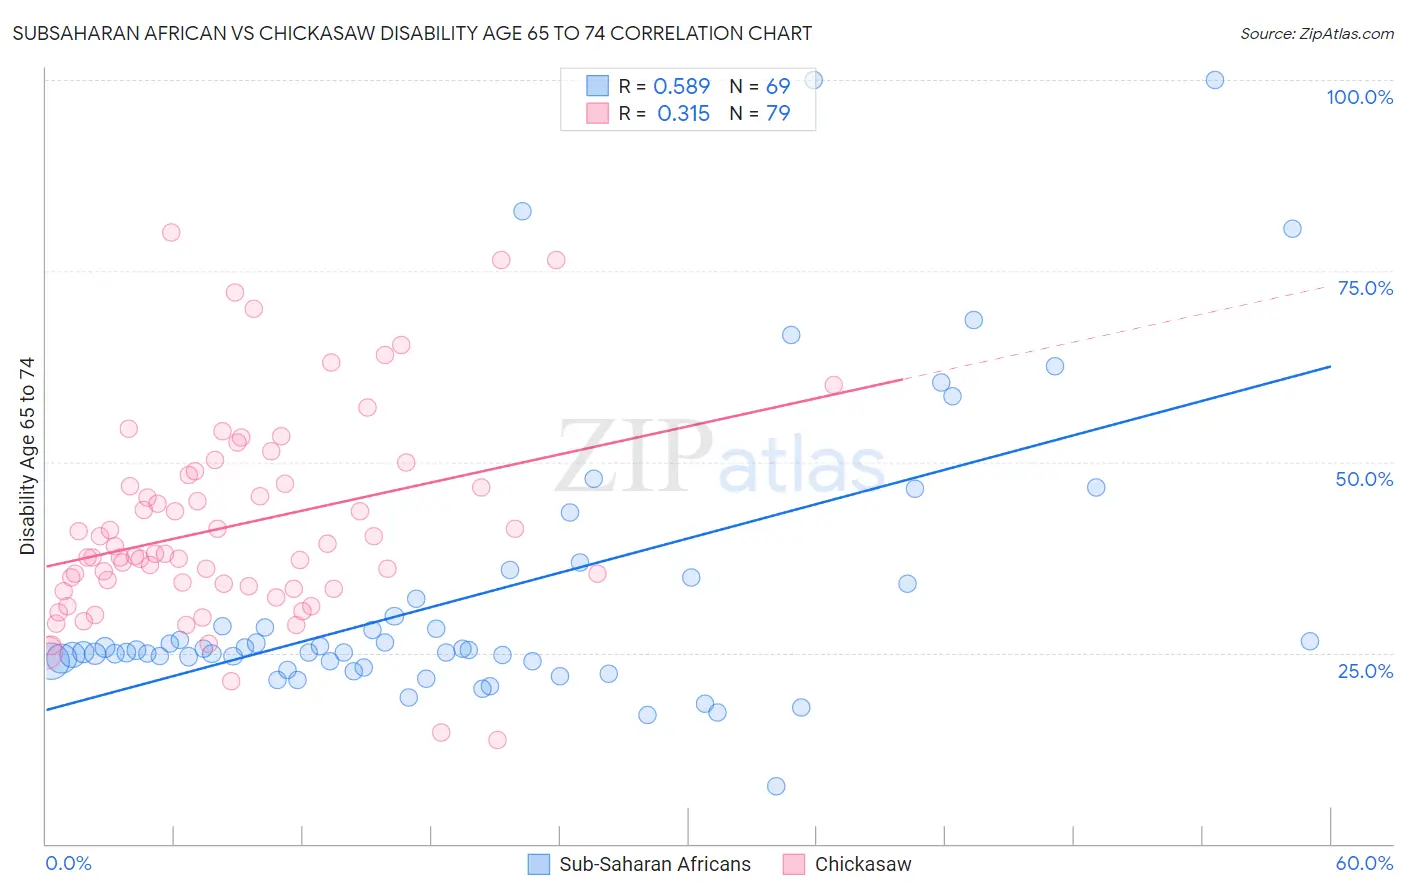 Subsaharan African vs Chickasaw Disability Age 65 to 74